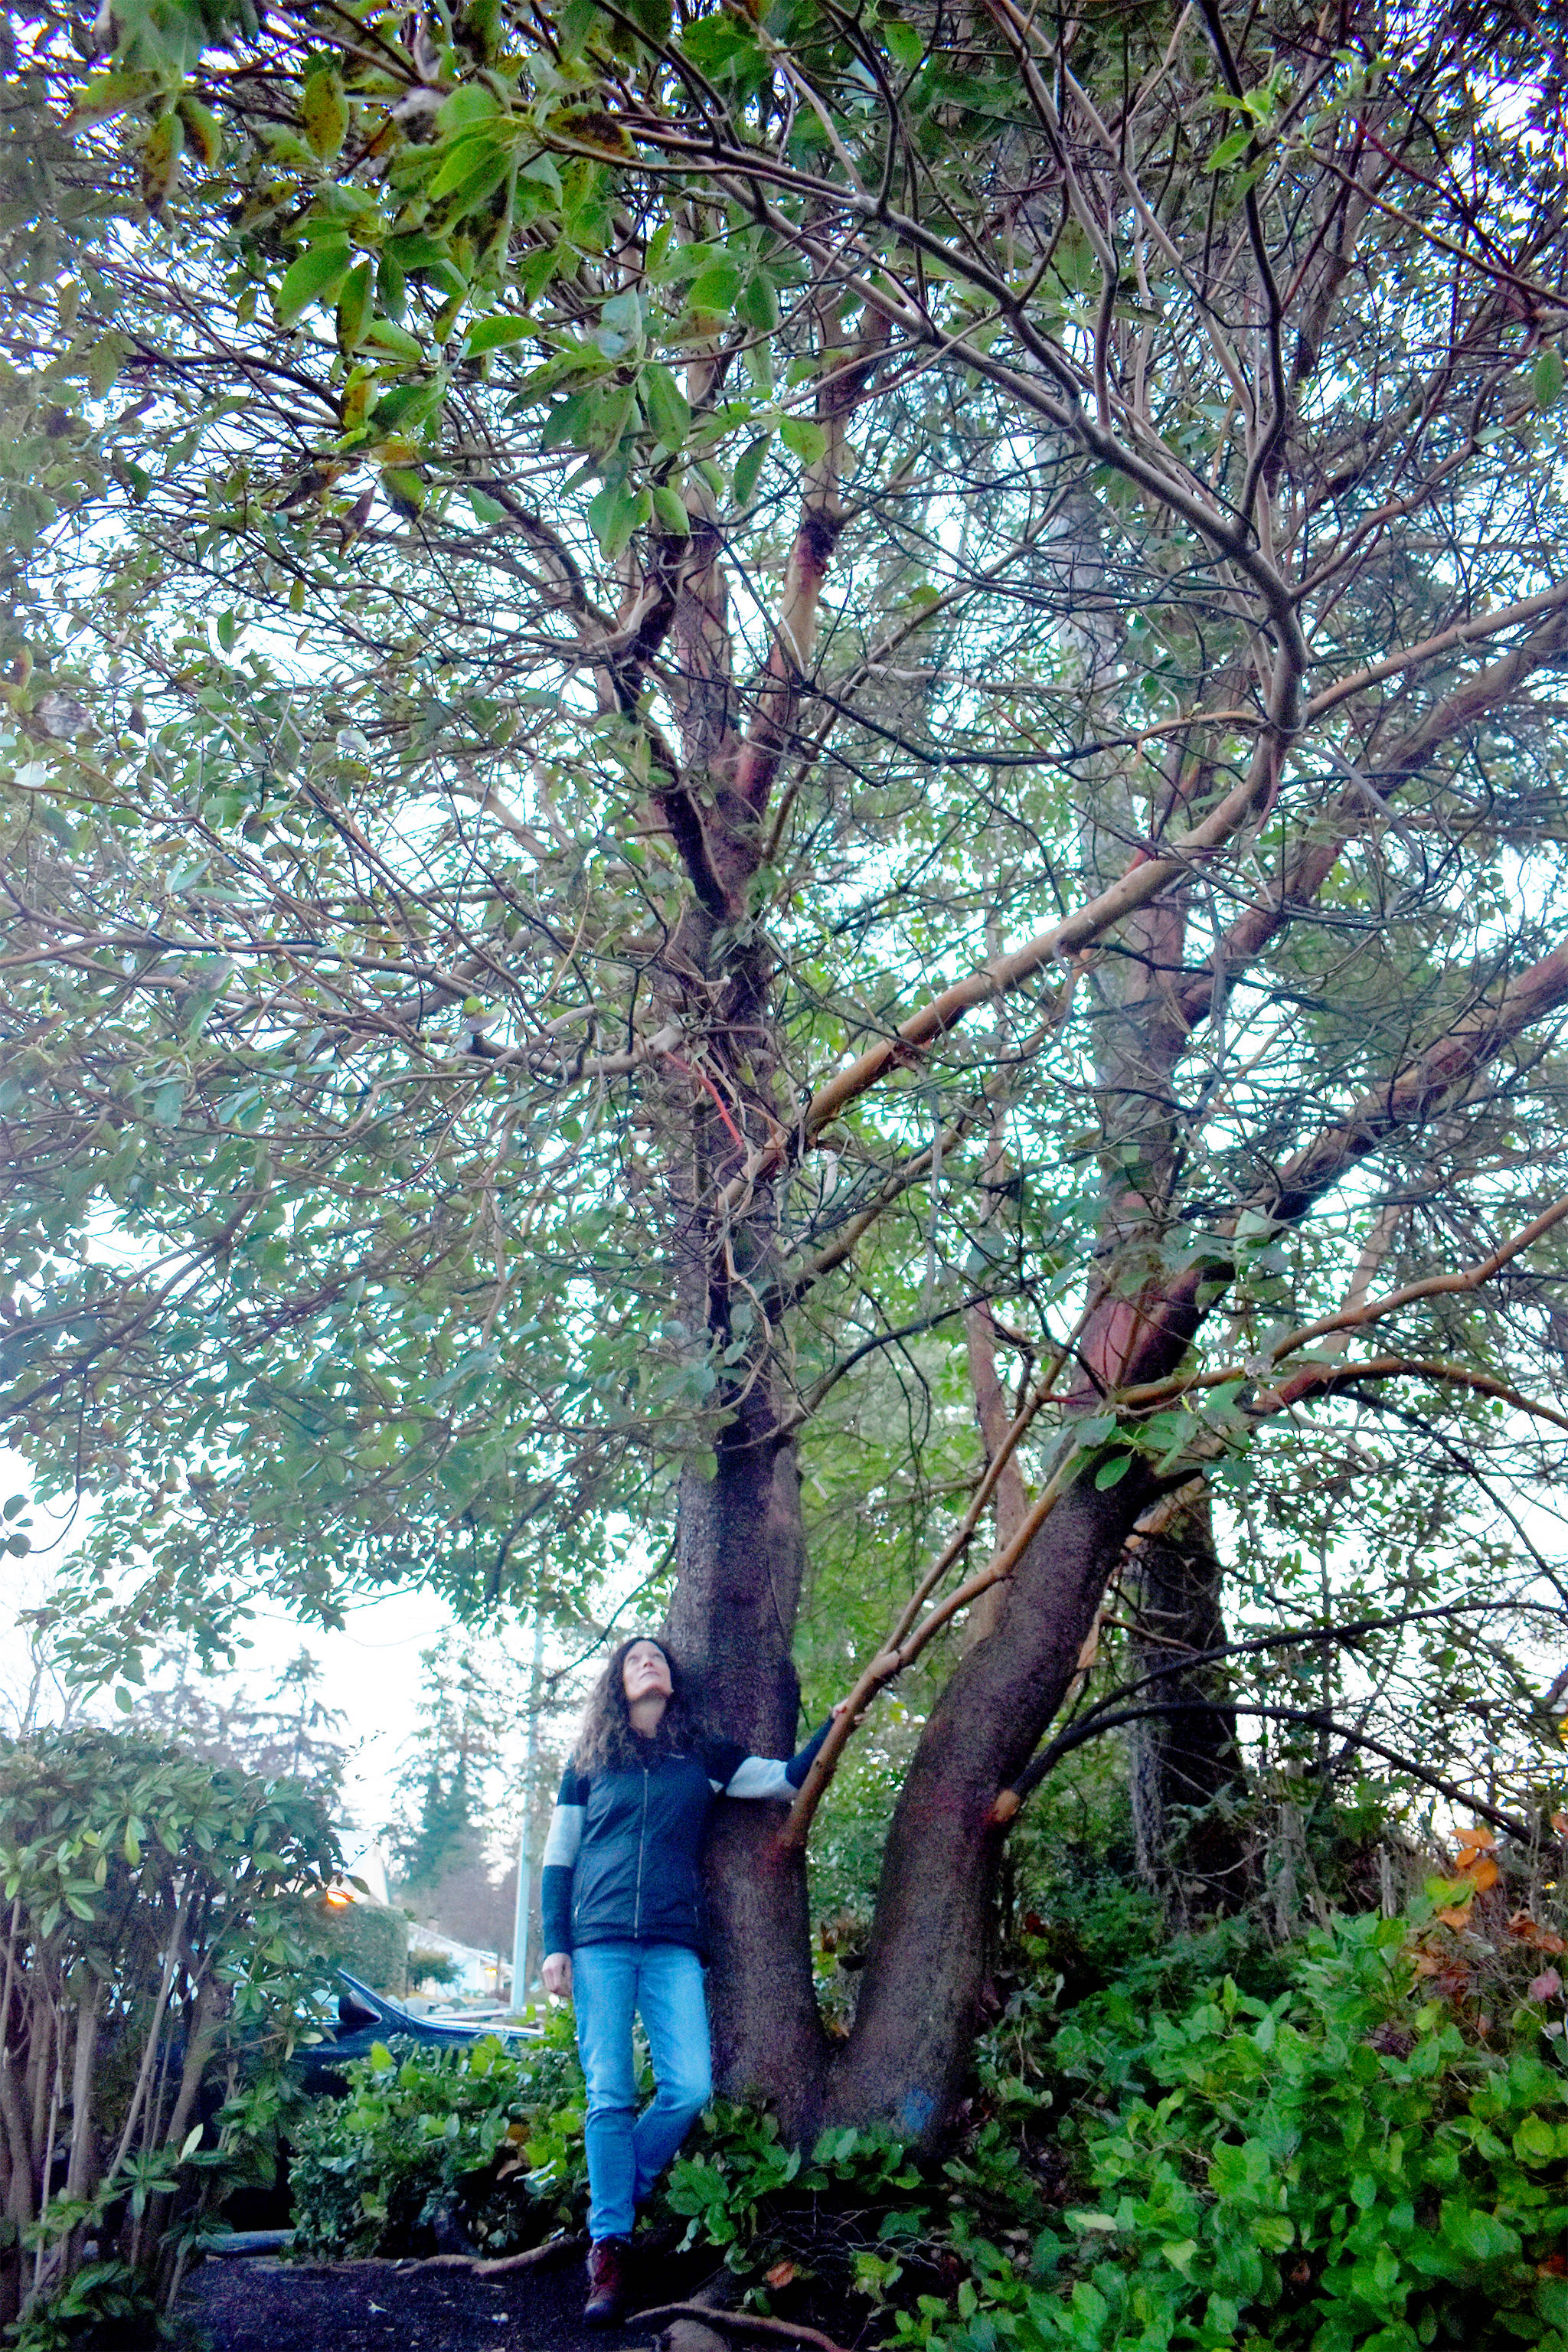 Photo by Emily Gilbert/Whidbey News-Times
Carol Johnston has watched this Pacific madrone grow for the past 14 years. It is slated to be removed during McDonald’s upcoming renovation in early February.